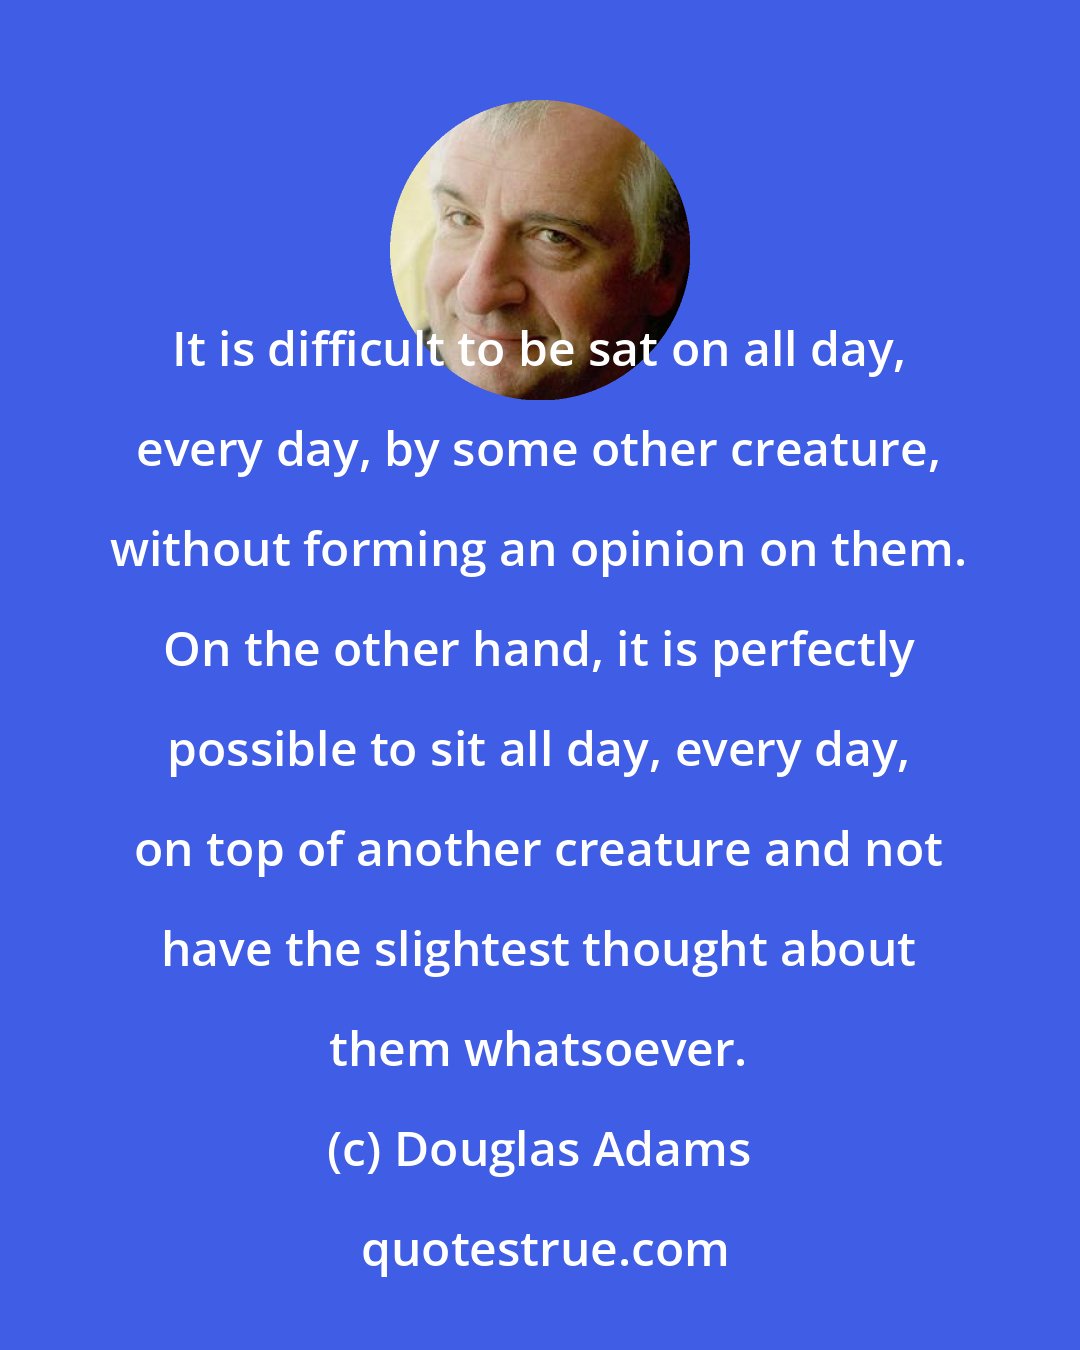 Douglas Adams: It is difficult to be sat on all day, every day, by some other creature, without forming an opinion on them. On the other hand, it is perfectly possible to sit all day, every day, on top of another creature and not have the slightest thought about them whatsoever.